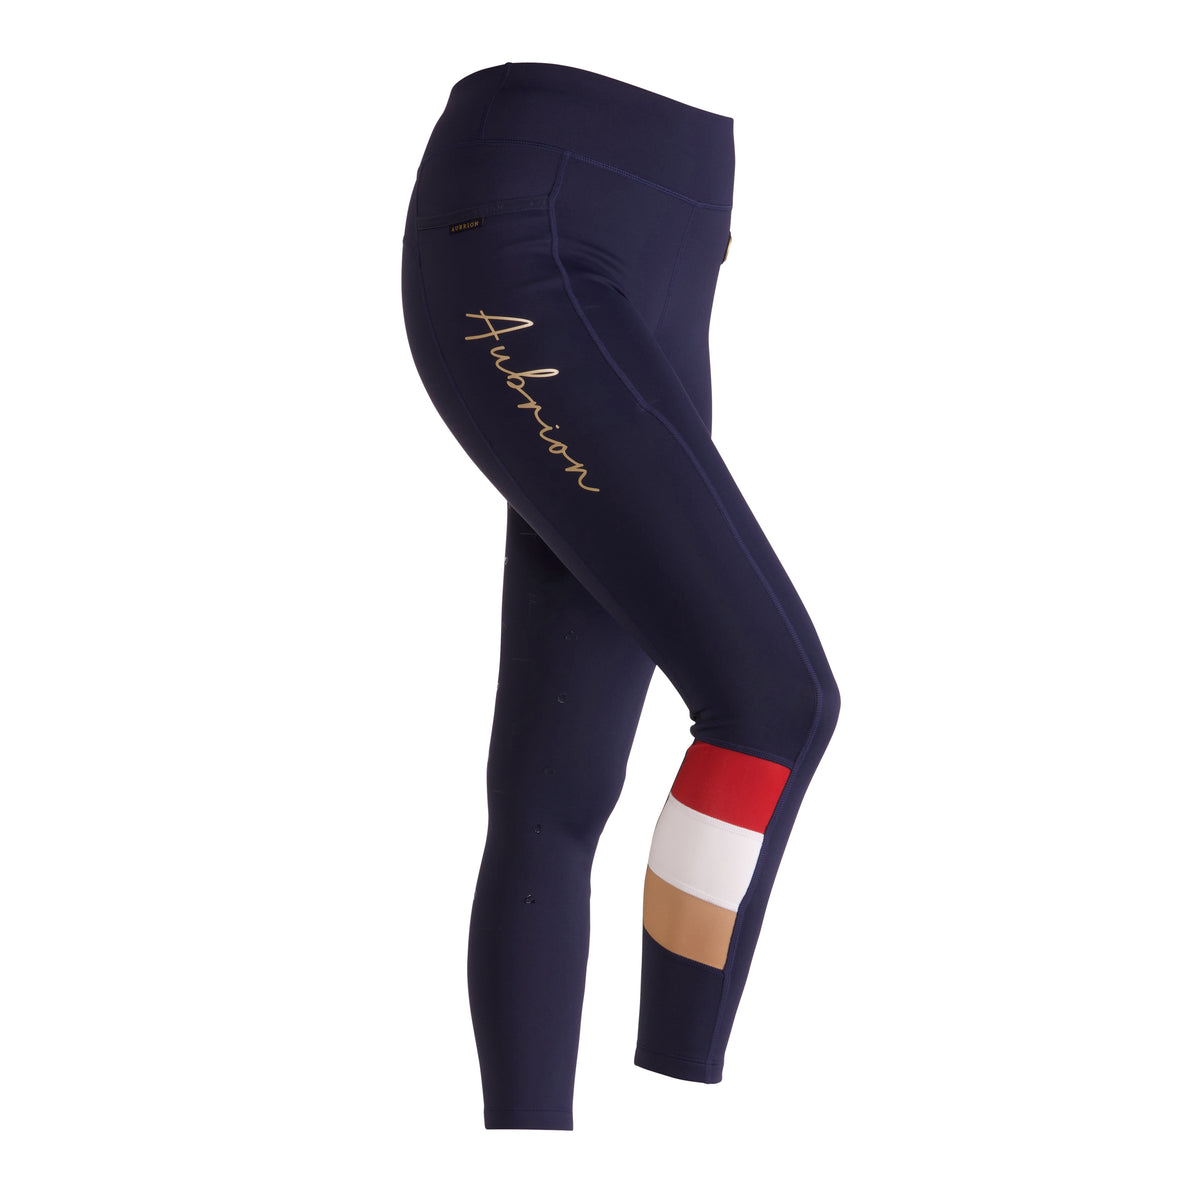 Shires Ladies Aubrion Team Shield Riding Tights